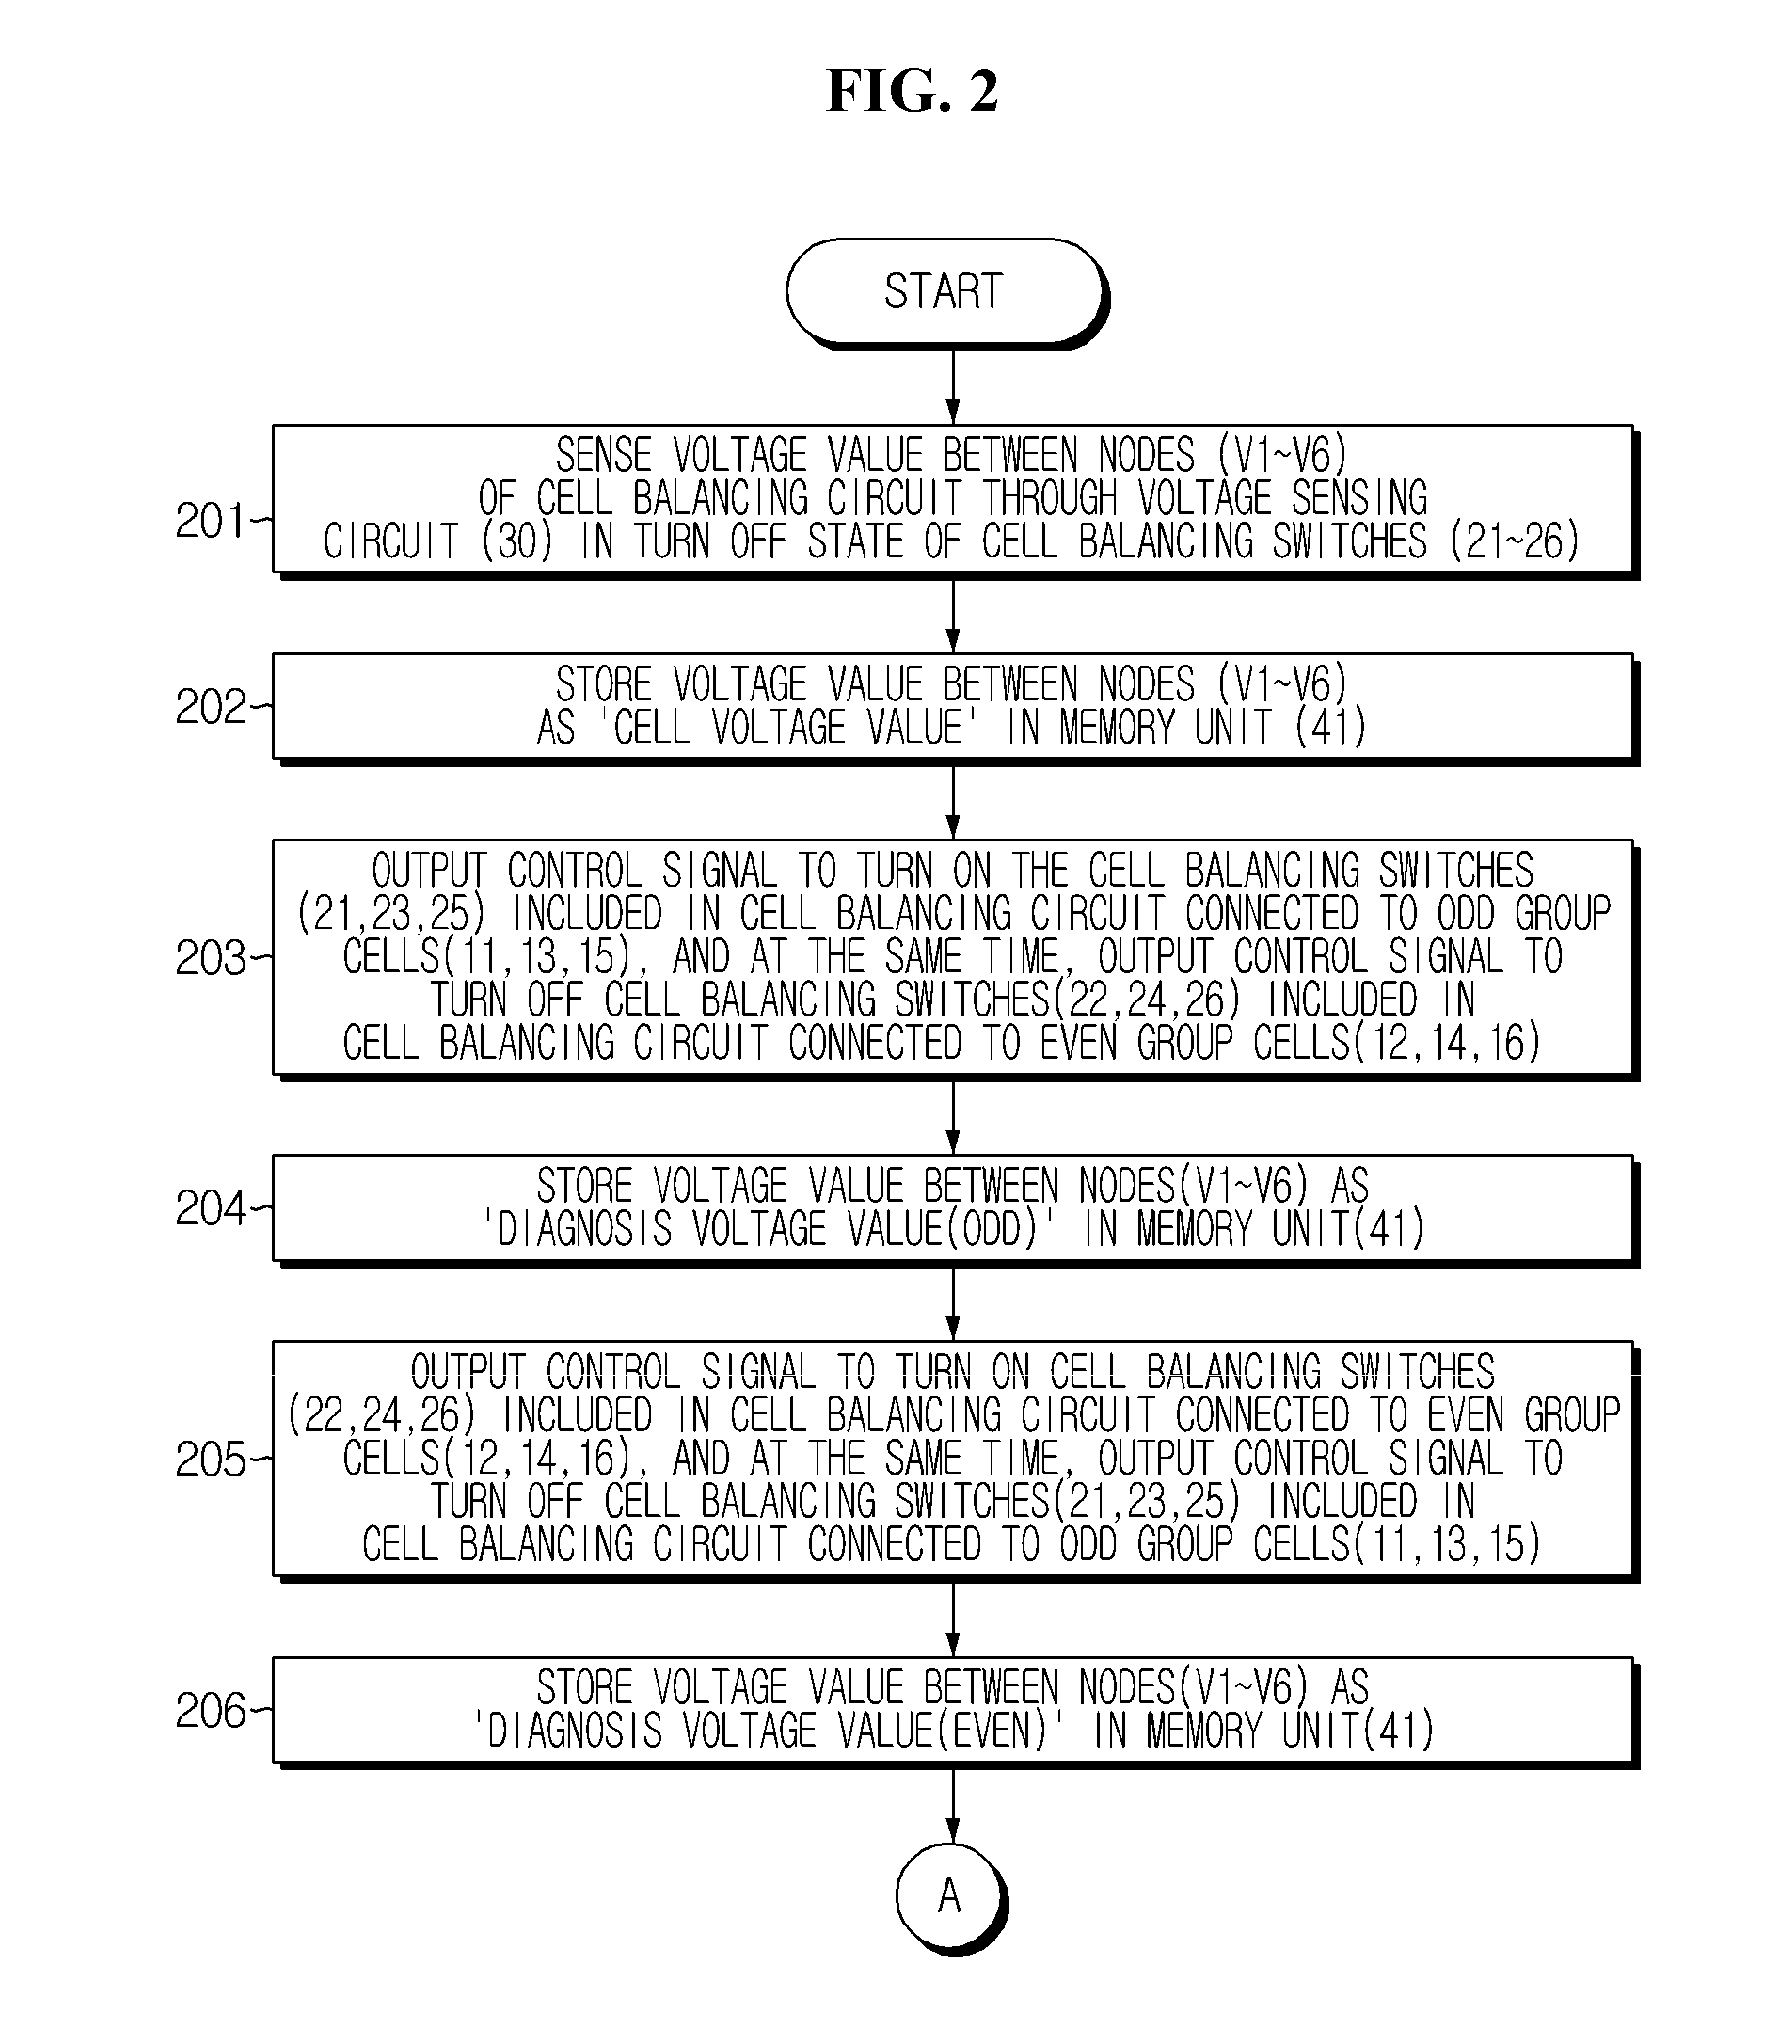 Apparatus and method for diagnosing abnormality in cell balancing circuit